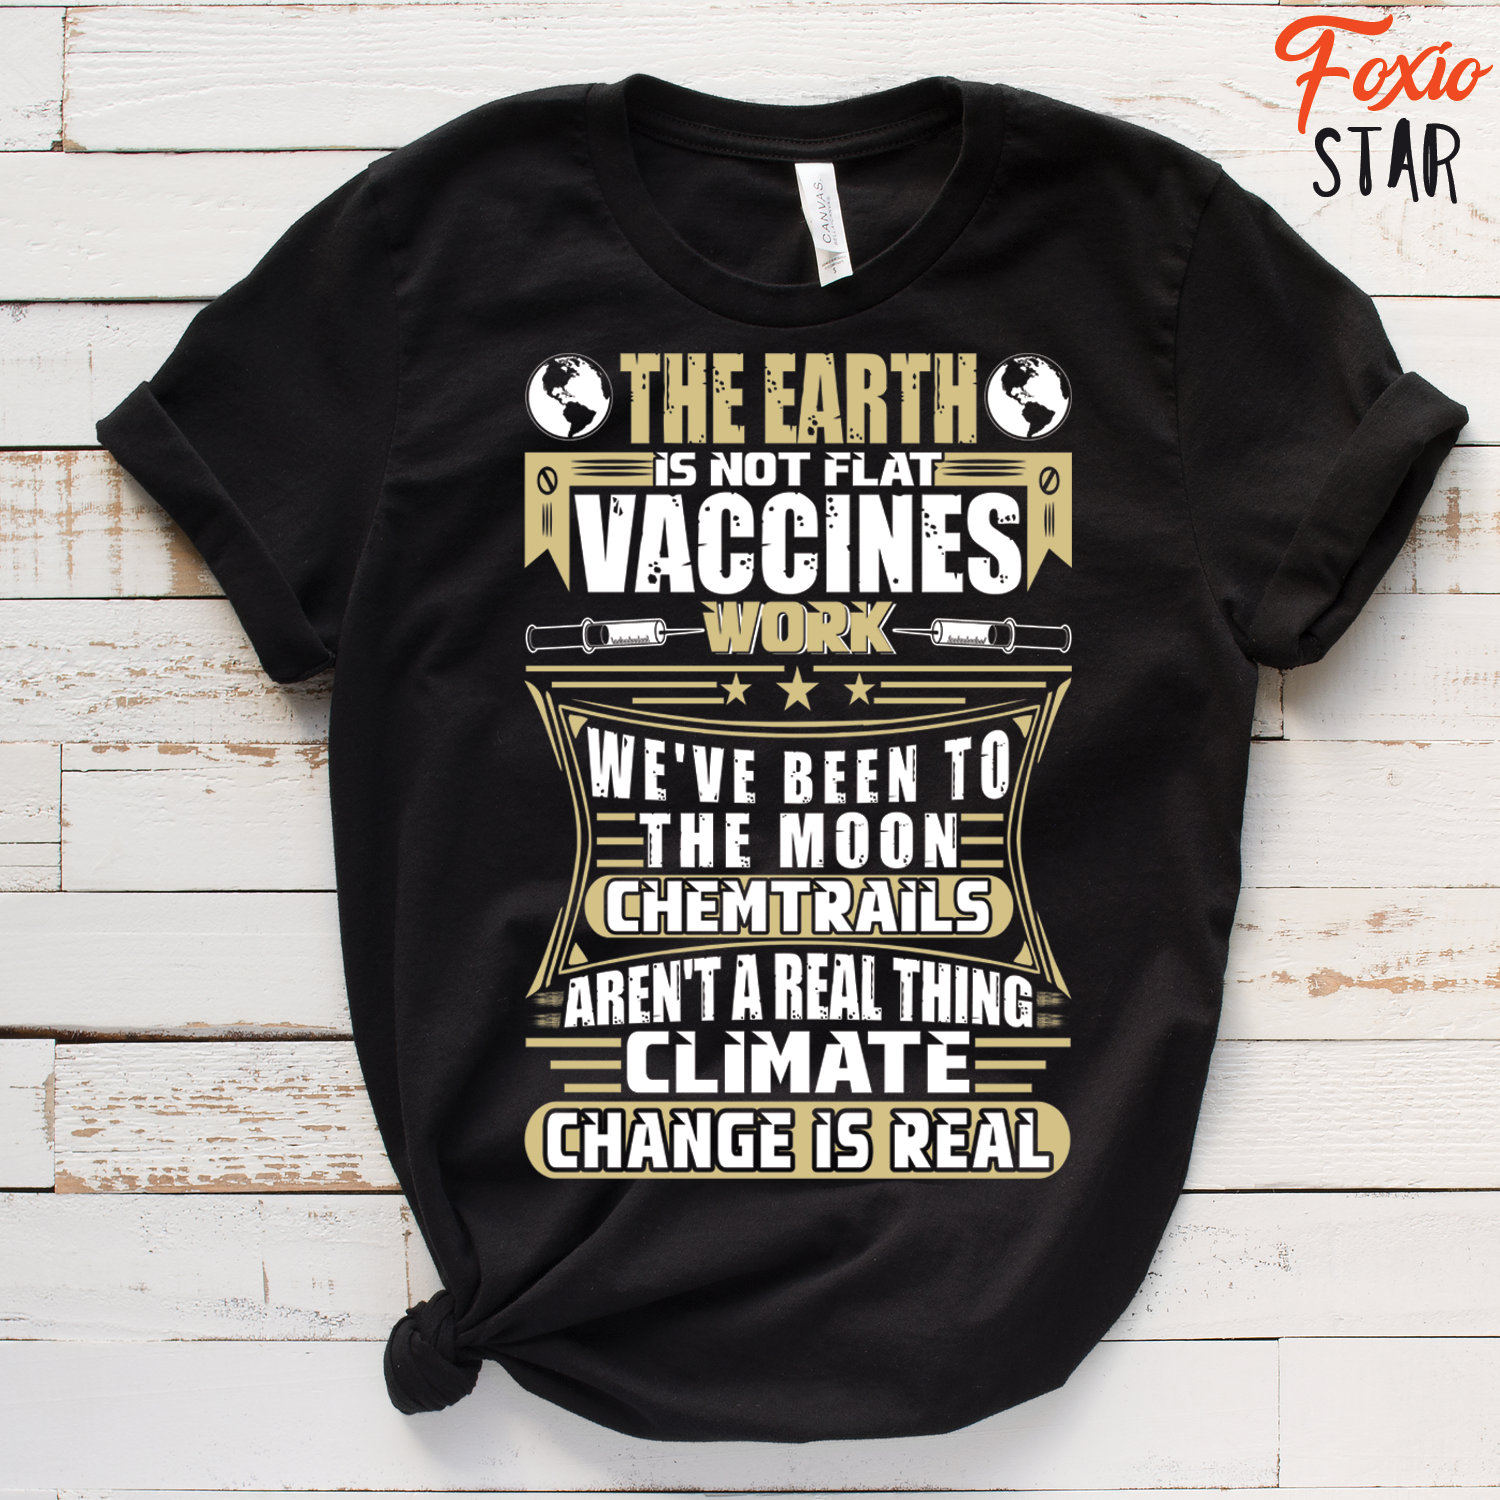 Vaccine Shirt Pro-Vaccine Shirt Vaccination Shirt Vaccinated Toddler Baby I Only Date Vaccinated Chicks T-Shirt